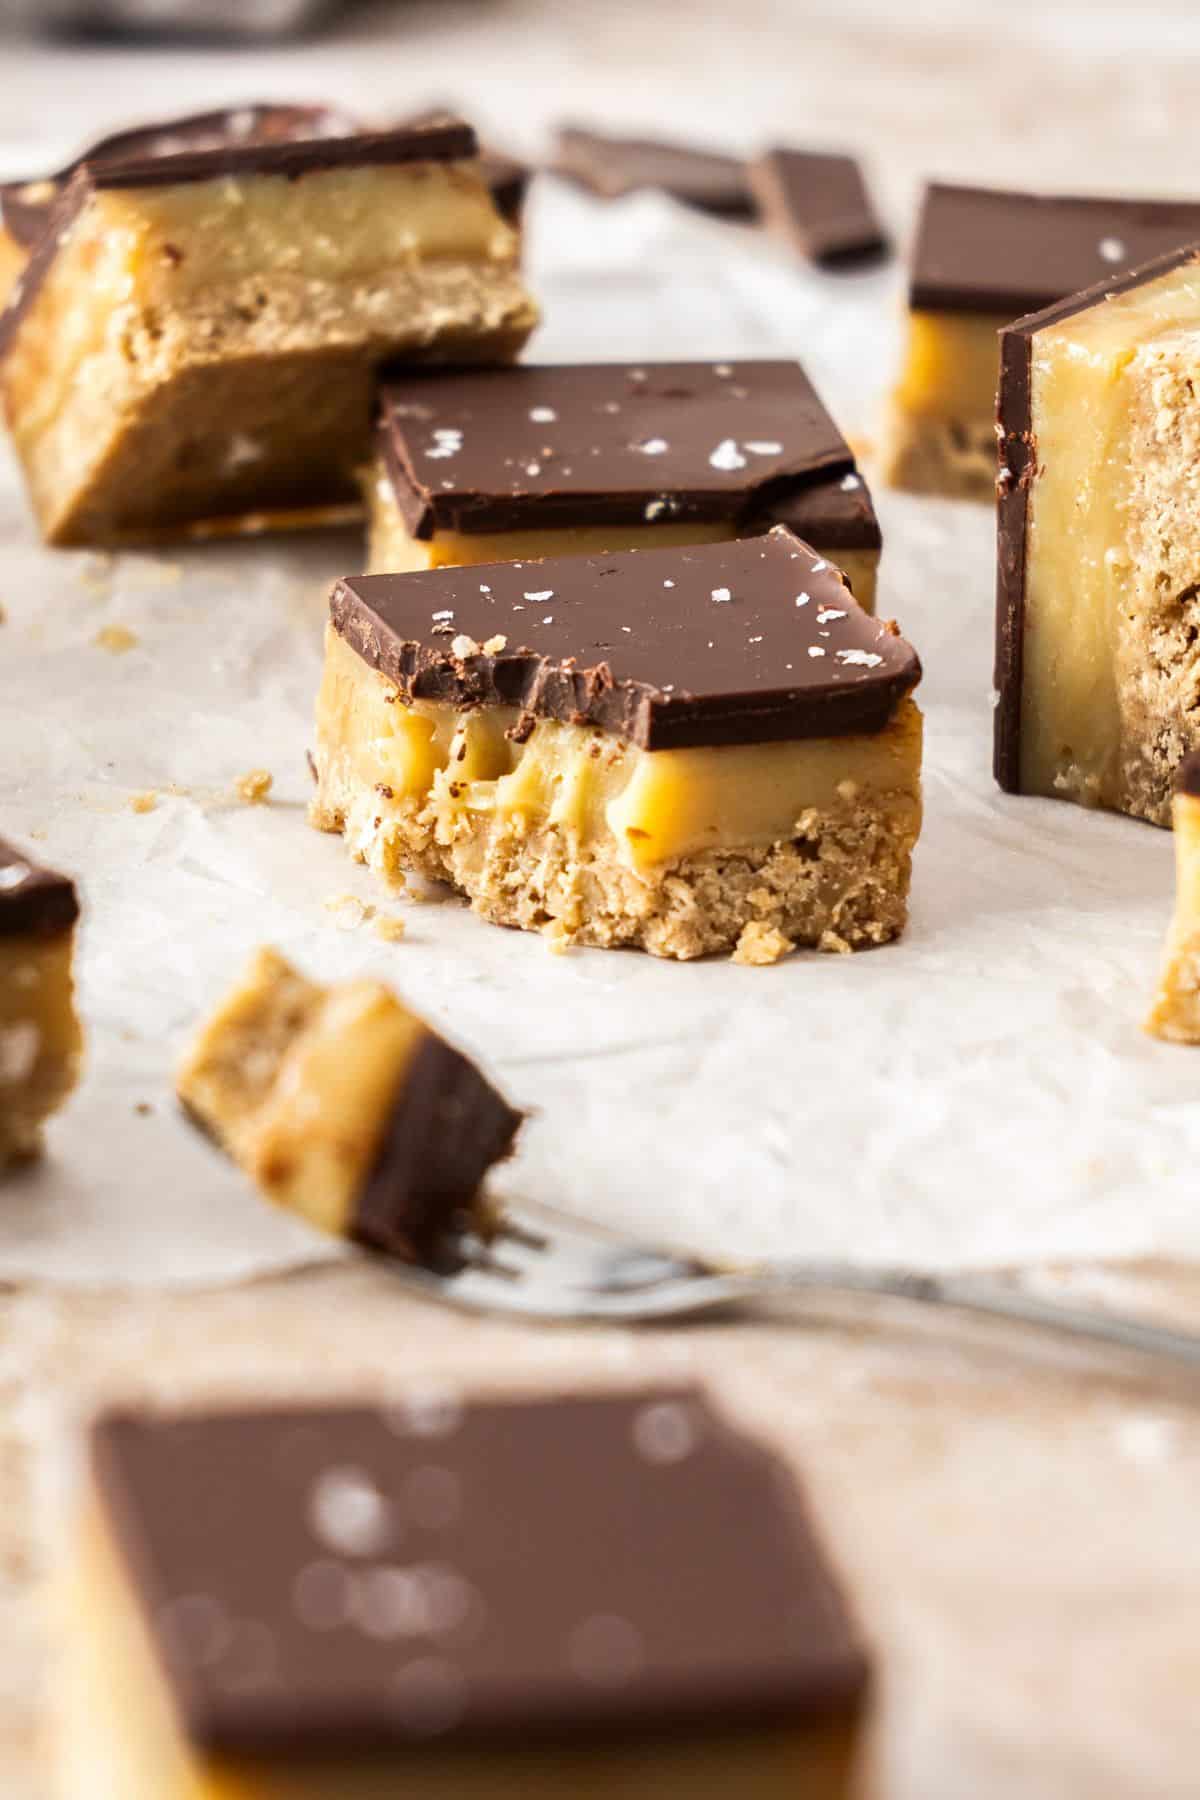 A few pieces of cut caramel slice on baking paper, with one with a small bite taken out of it.